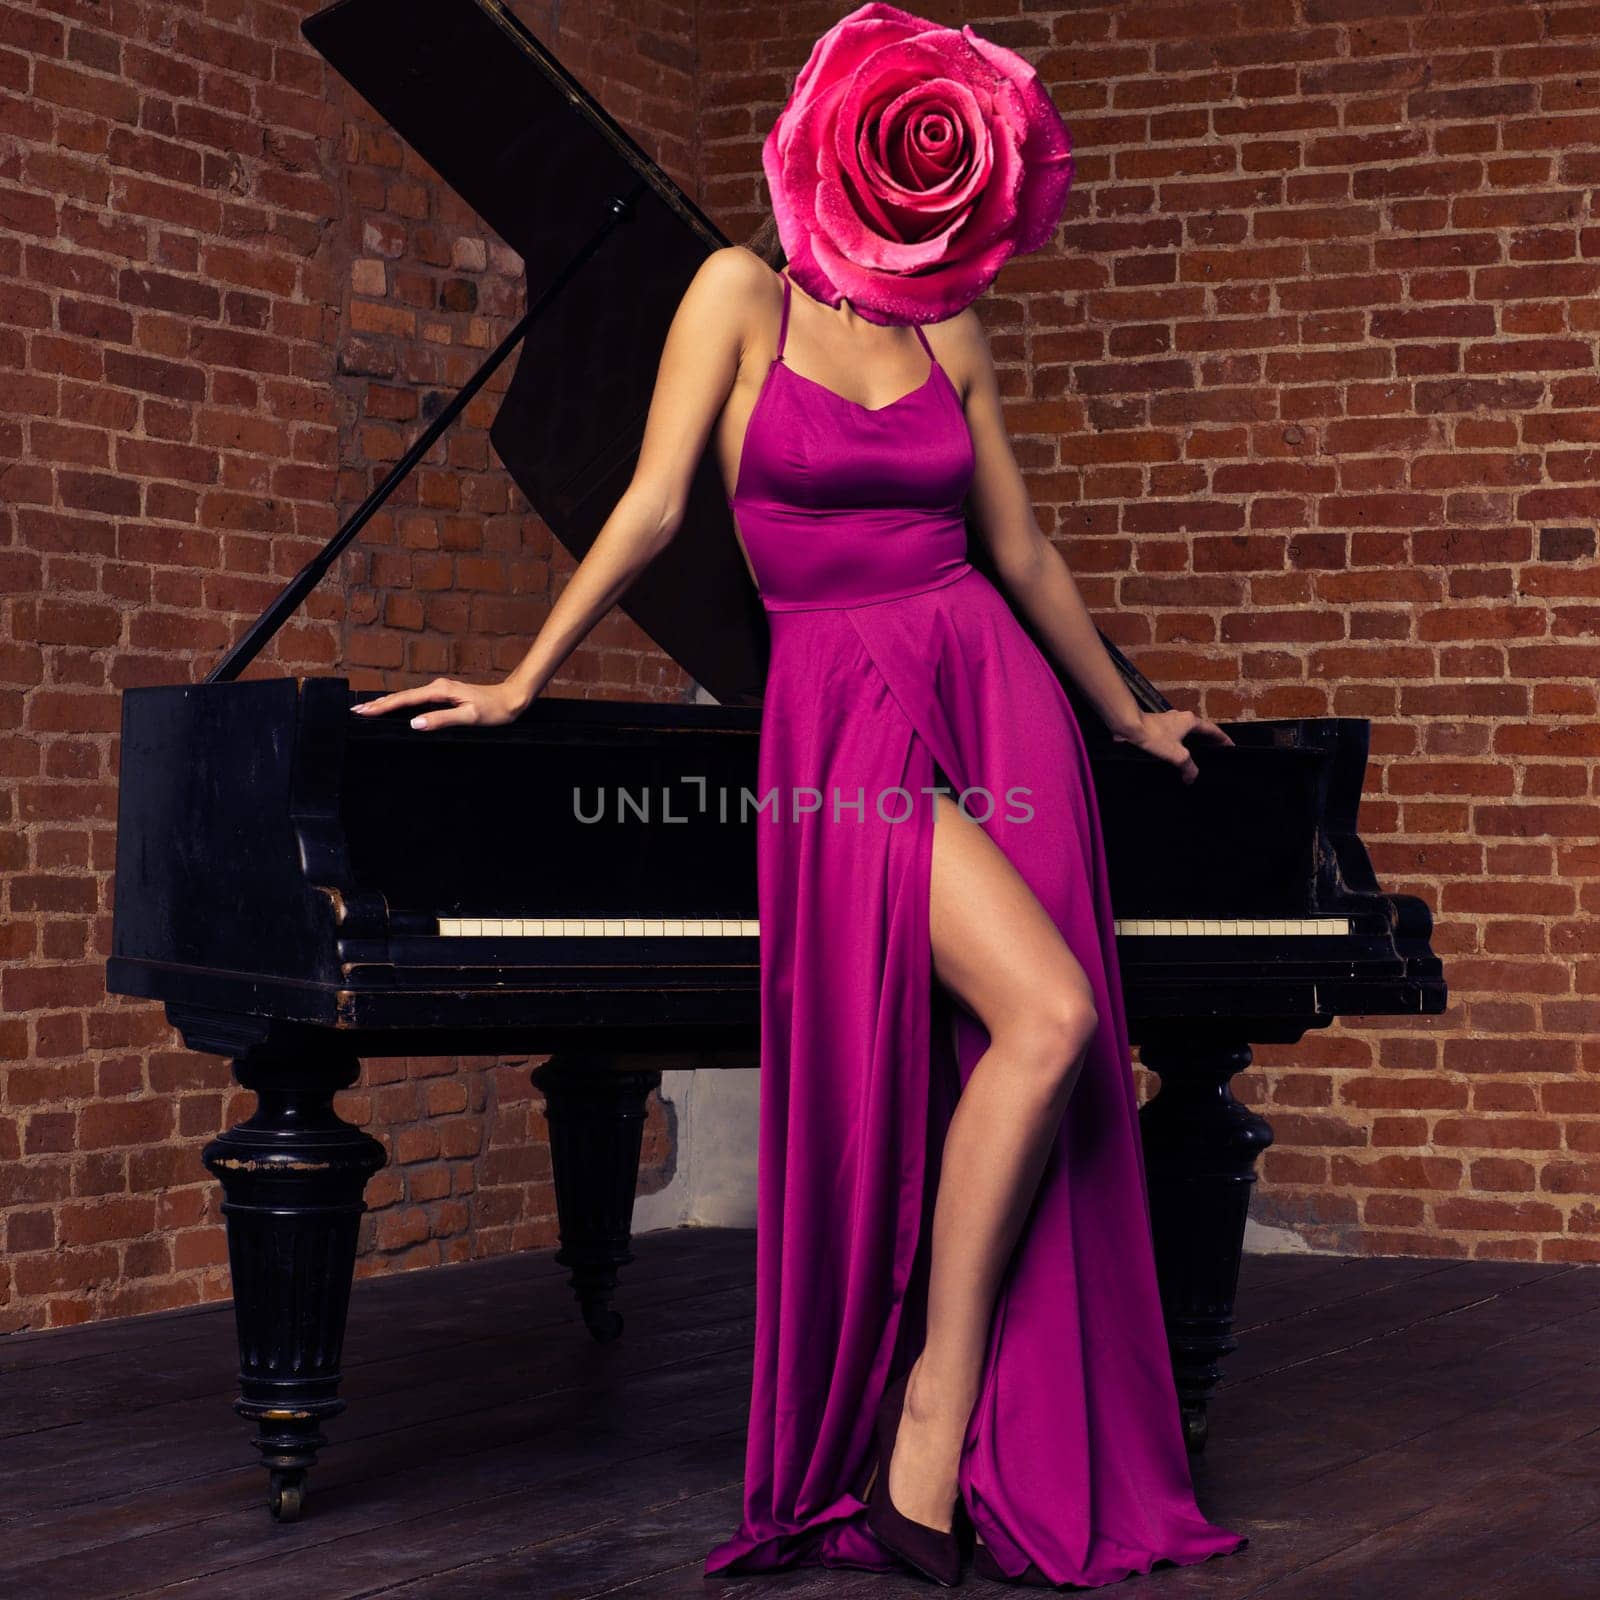 Abstract contemporary art collage sexy beautiful woman in long classic red dress posing with old piano with flower rose bud on face.